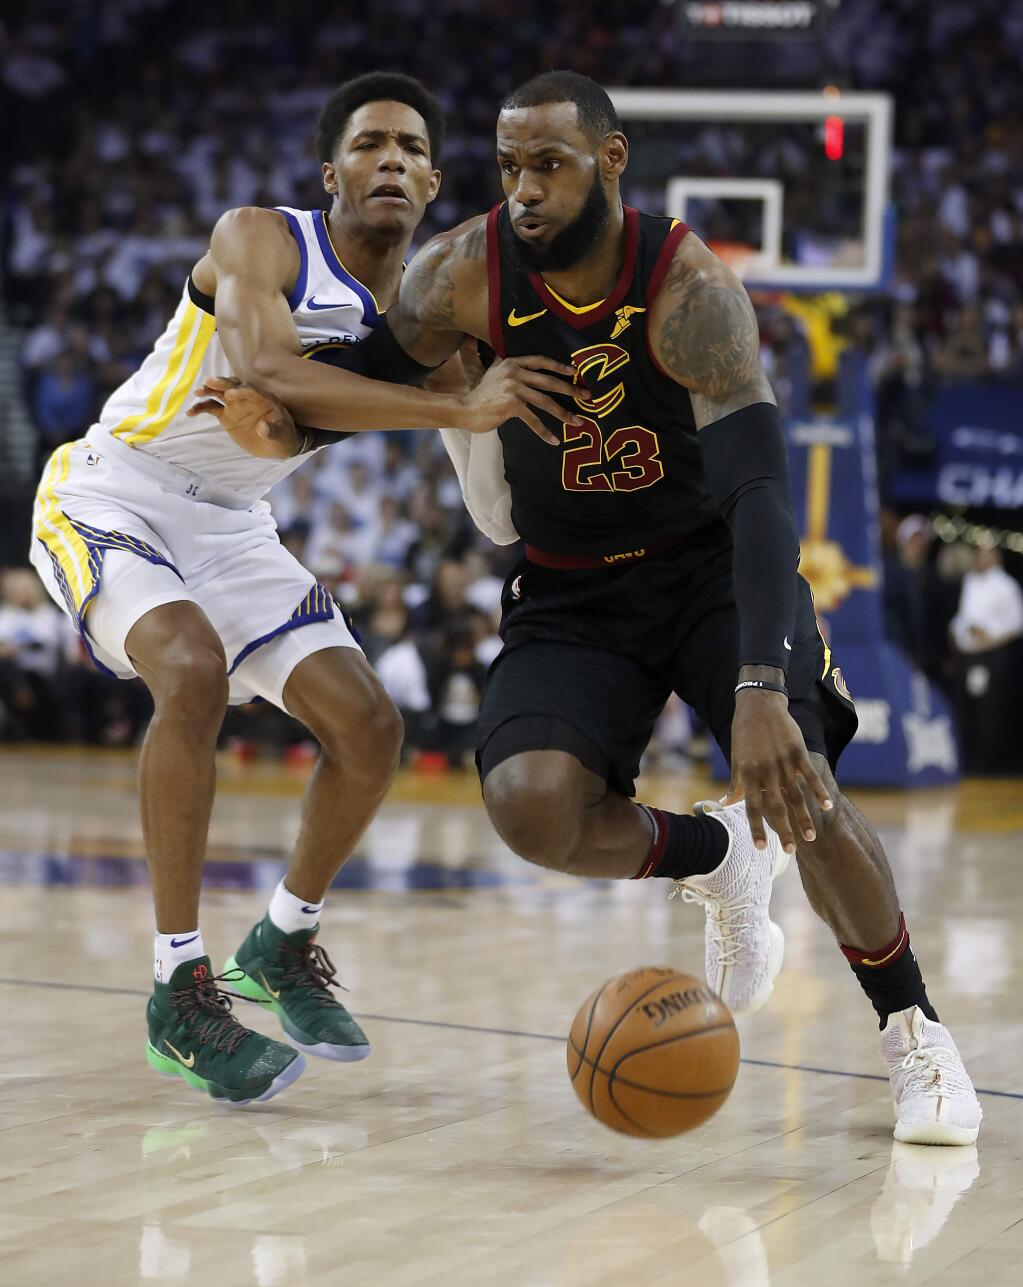 Cleveland Cavaliers forward LeBron James (23) drives to the basket past Golden State Warriors guard Patrick McCaw during the first half of an NBA basketball game in Oakland, Calif., Monday, Dec. 25, 2017. (AP Photo/Tony Avelar)